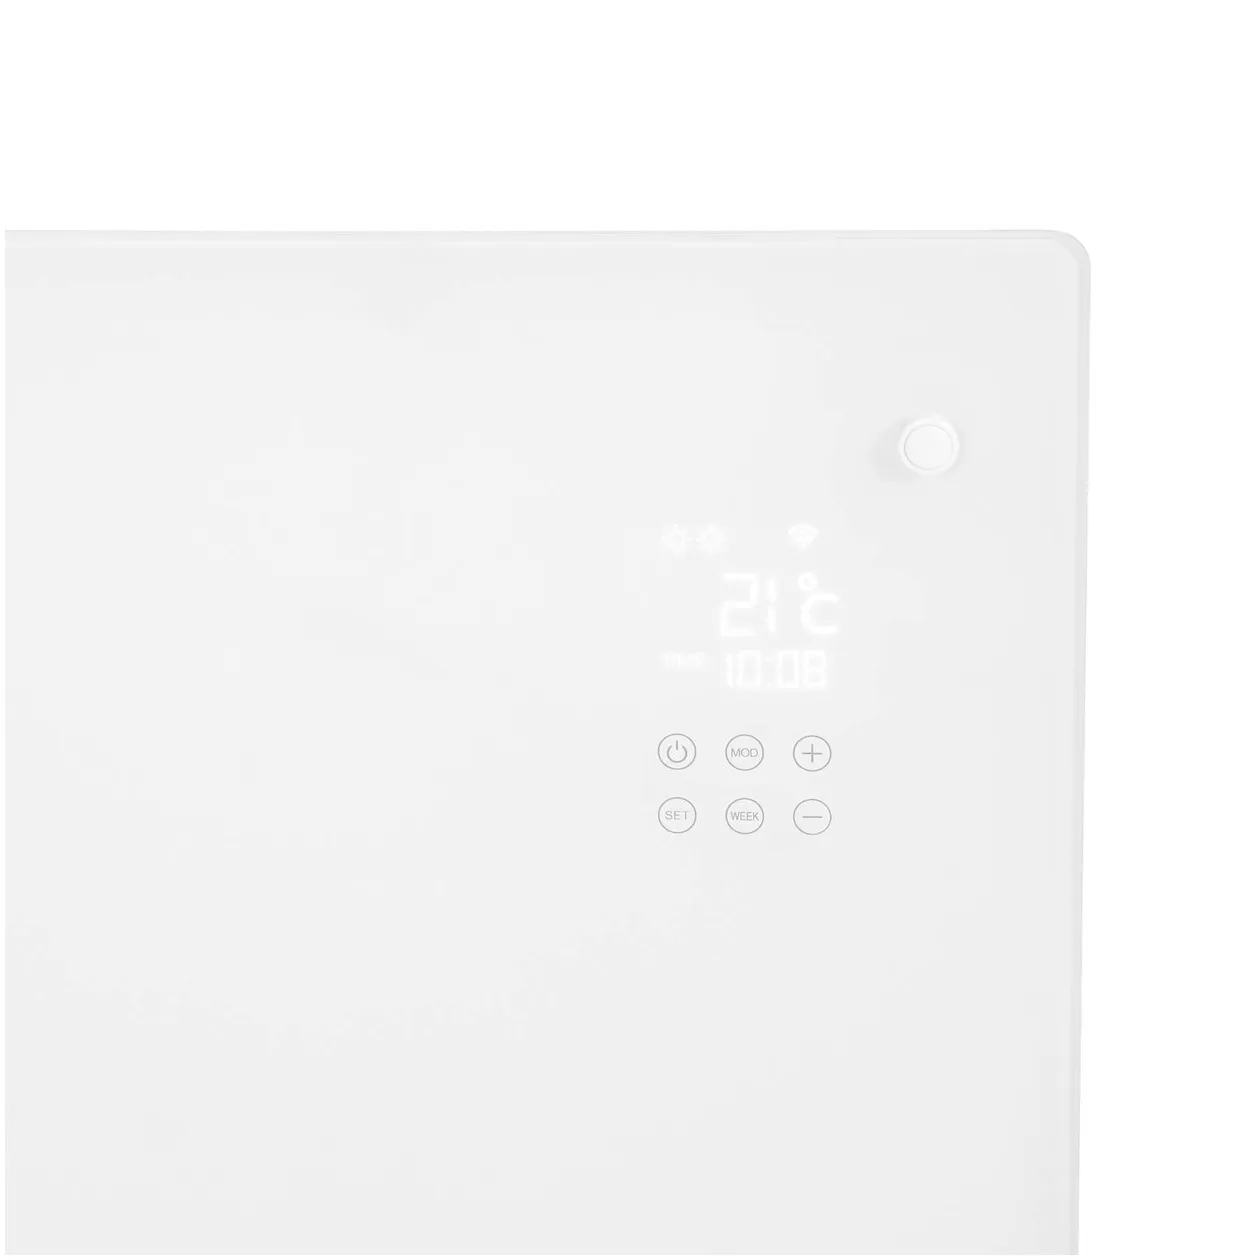 Eurom Alutherm Verre 2000 Wi-Fi